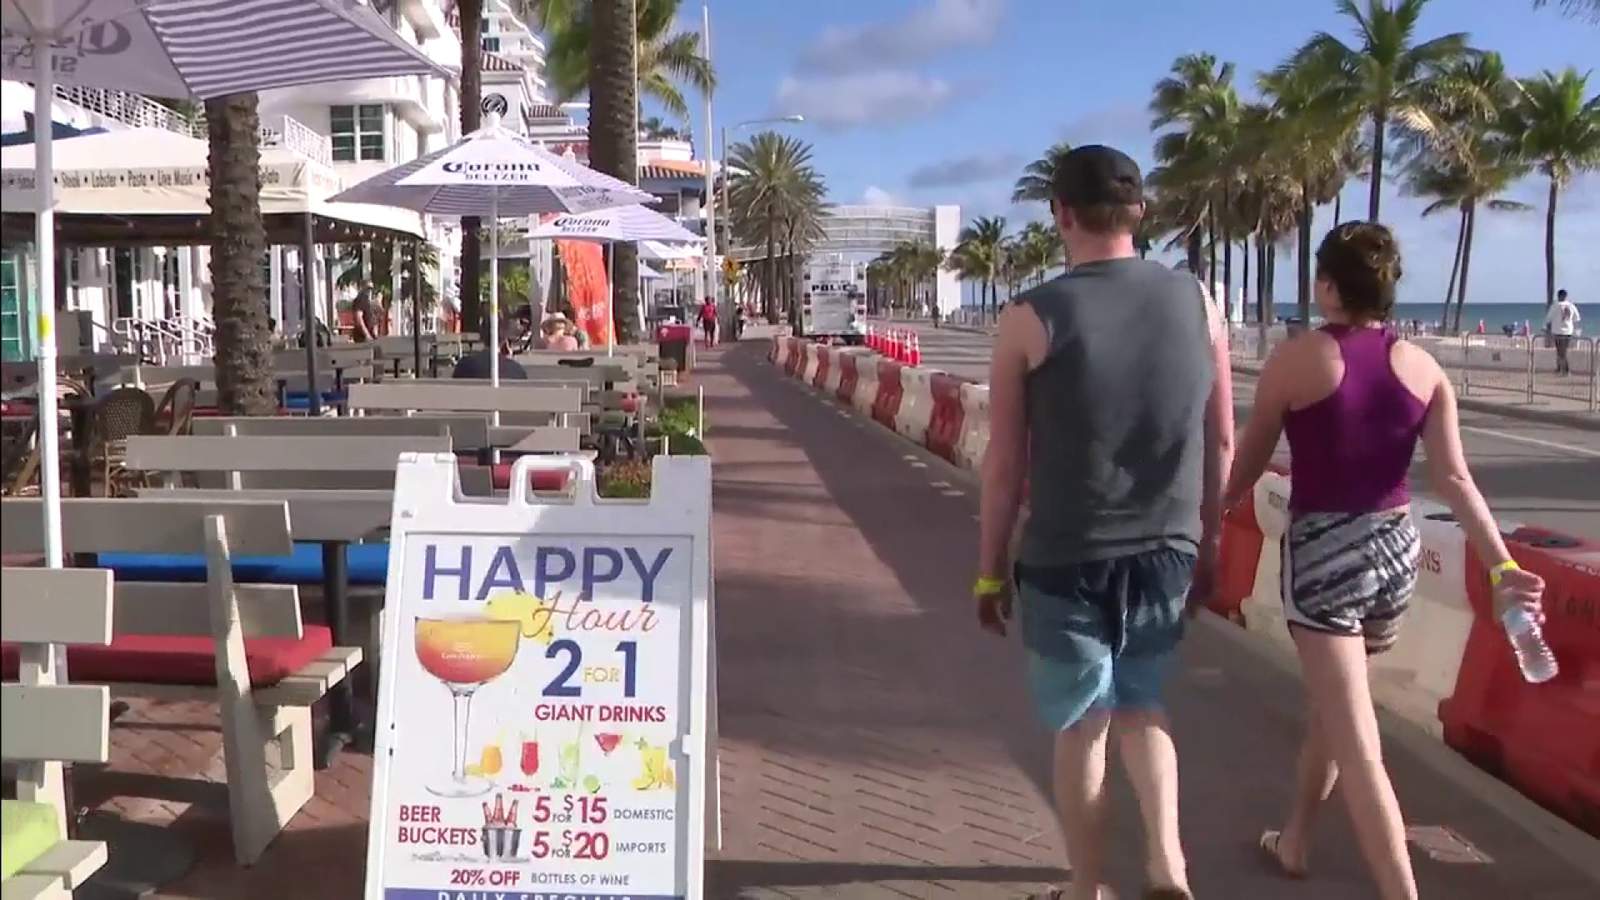 Police in Fort Lauderdale out to enforce safety guidelines during Spring Break